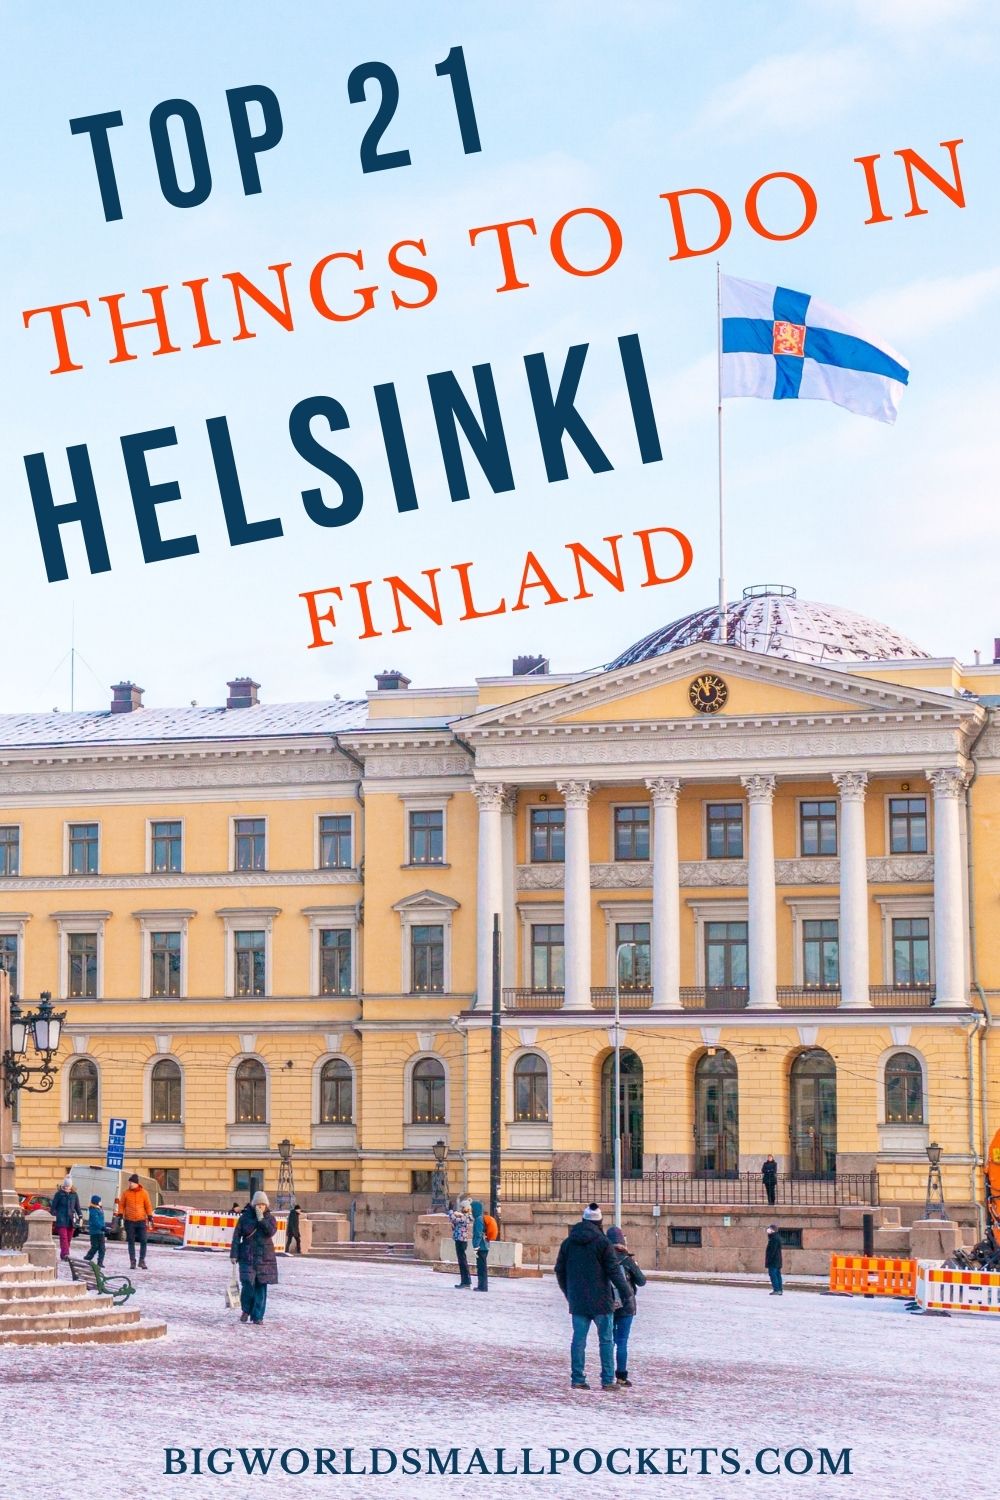 Top 21 Things to Do in Helsinki, Finland